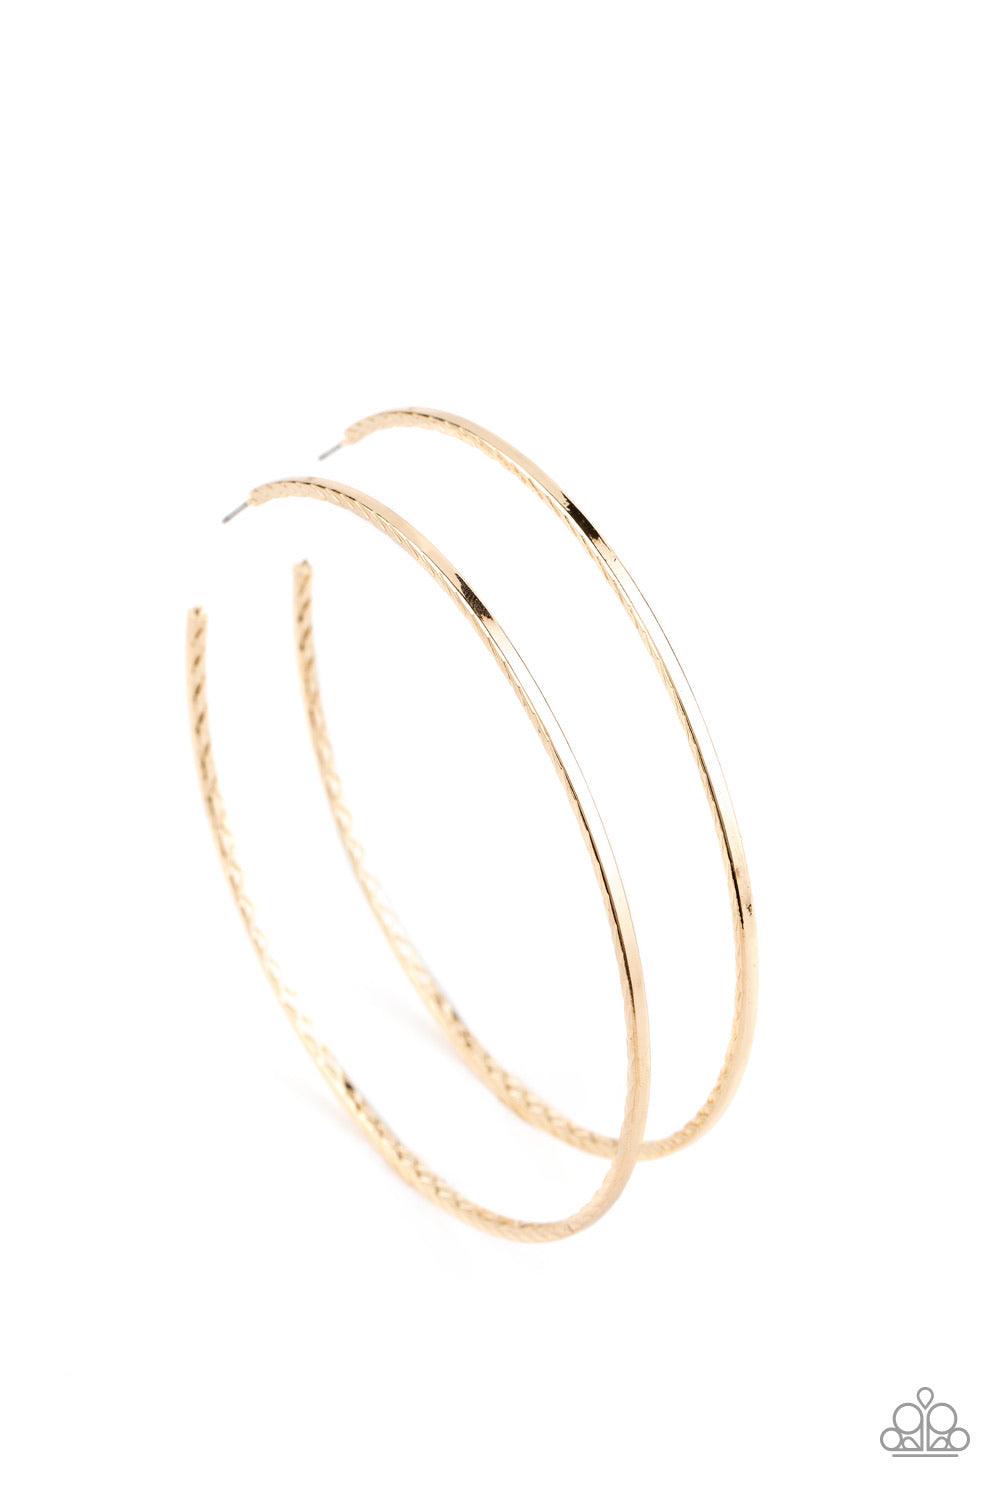 Paparazzi Accessories Diamondback Diva - Gold Etched in a diamond cut textures, a dramatically oversized shiny gold hoop curls around the ear for an exaggerated look. Earring attaches to a standard post fitting. Hoop measures approximately 3 1/2" in diame